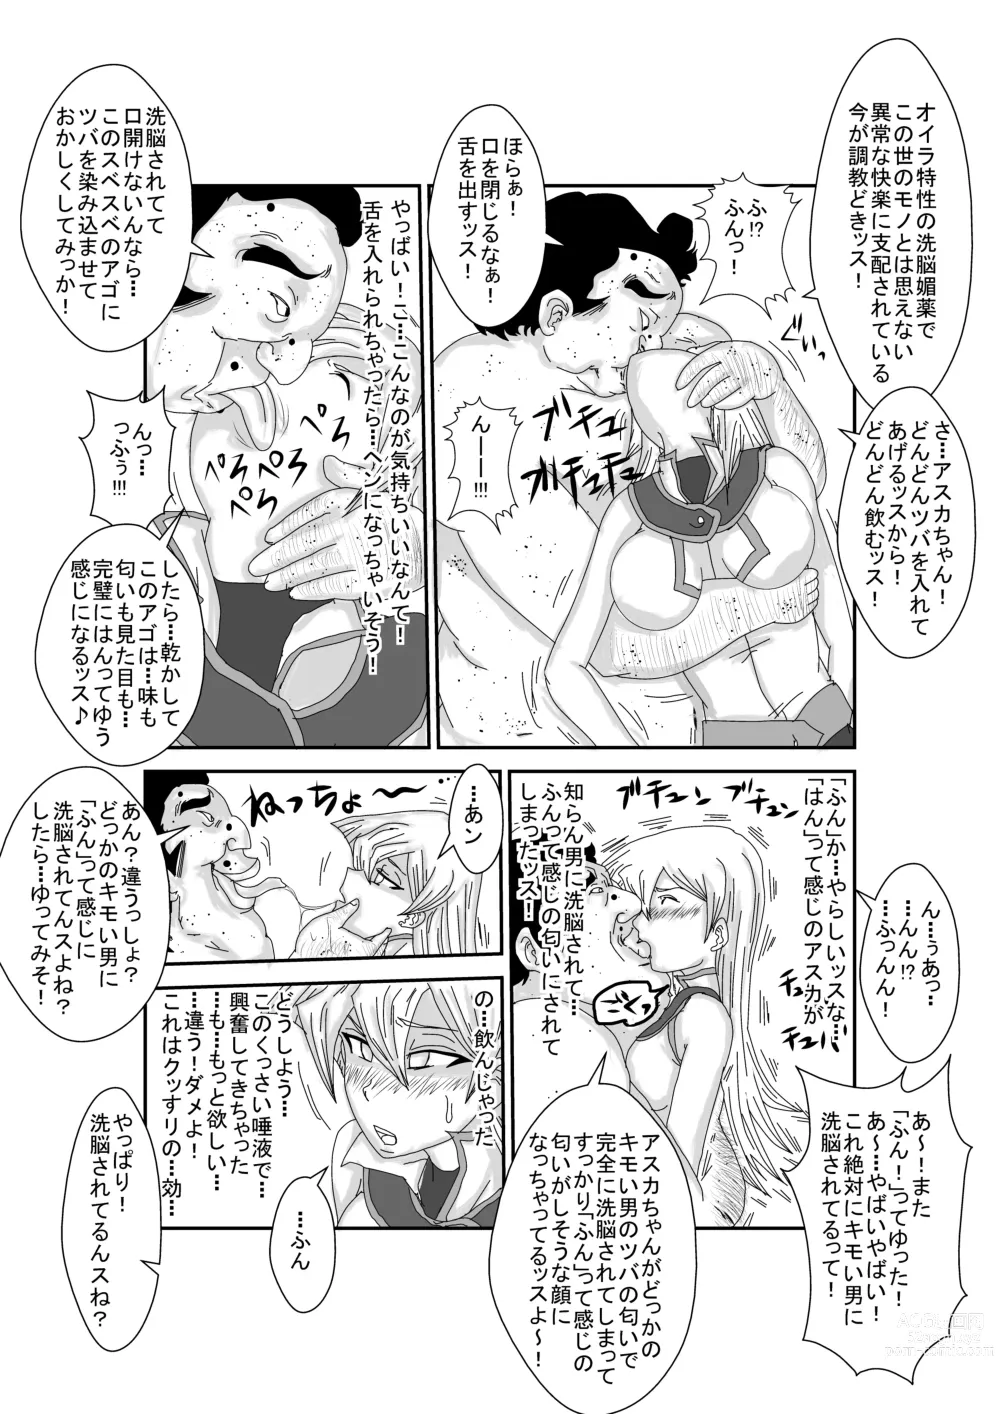 Page 6 of doujinshi Alexis Rodes Corrupted